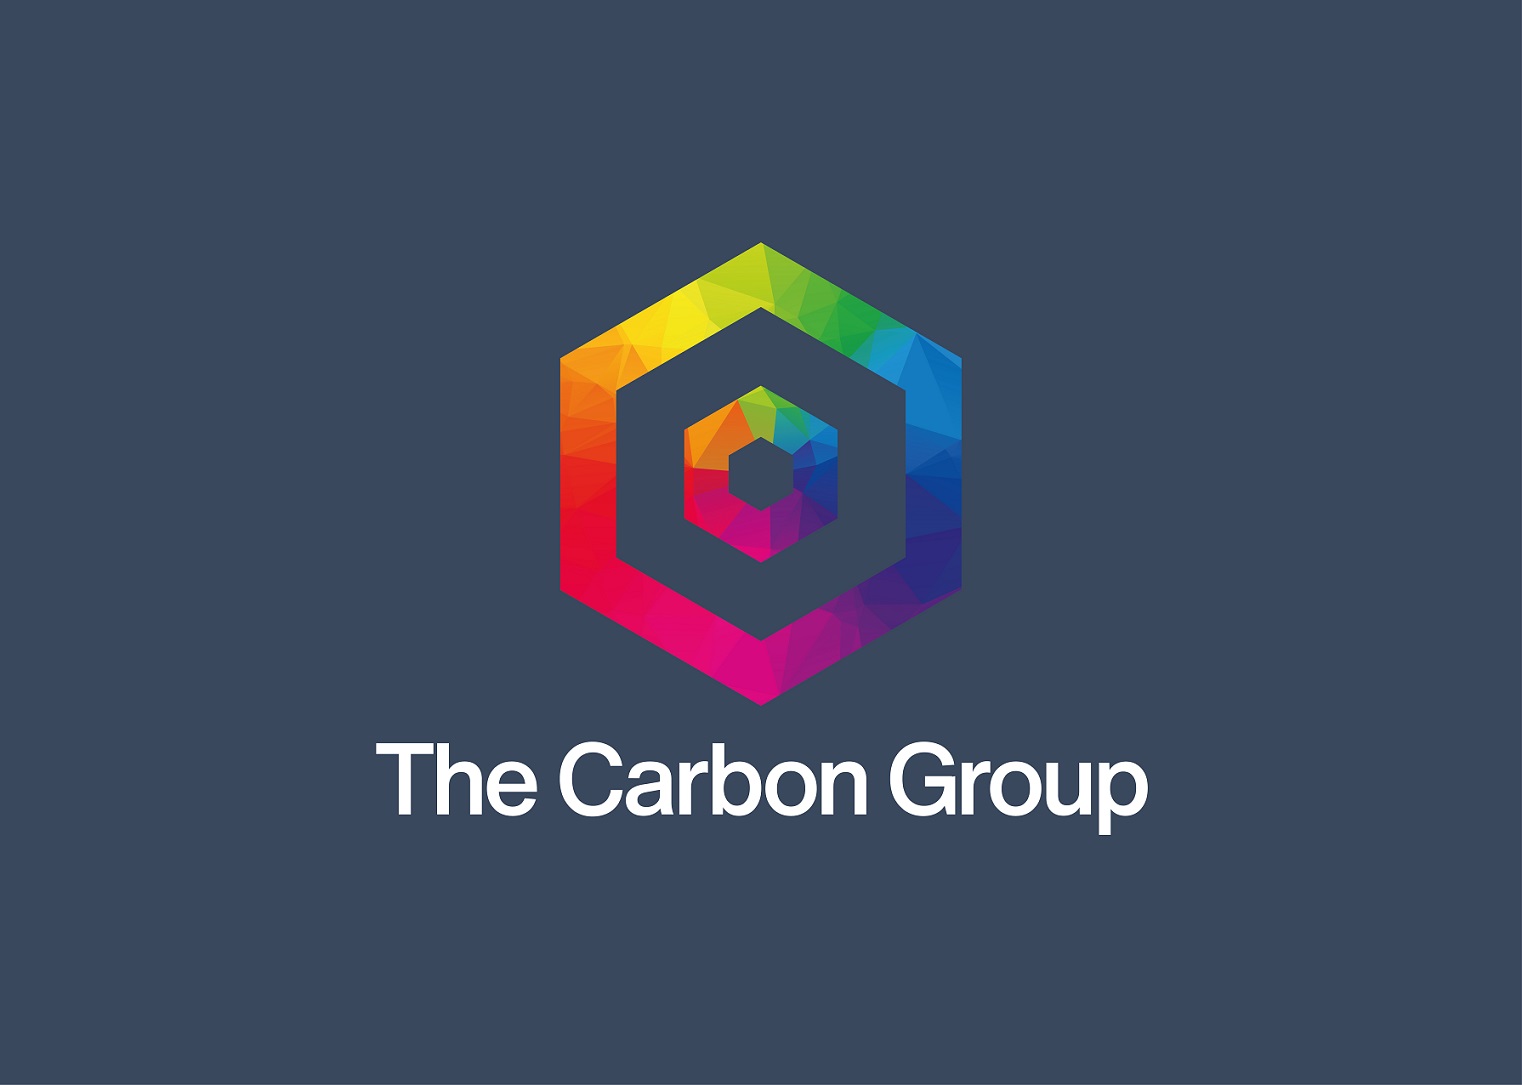 The Carbon Group's logo